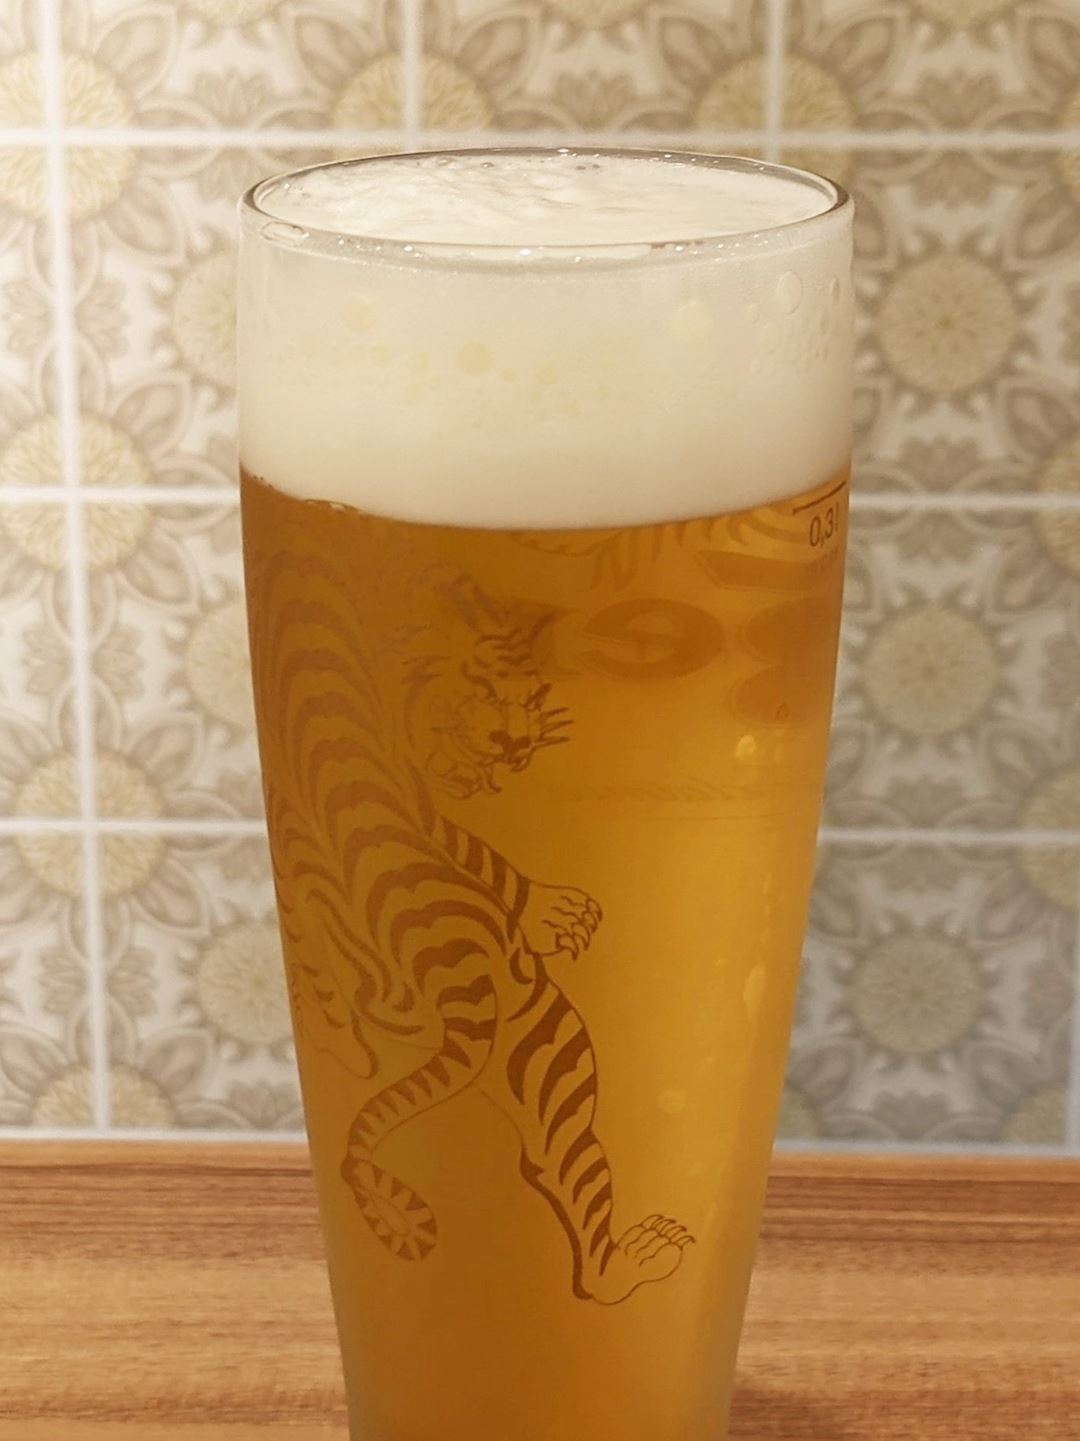 Tiger Beer タイガービール Singaporean Cafe and Bar LITTLE MERLION シンガポール カフェバー リトルマーライオン in Tokyo Japan 東京 足立区 西新井